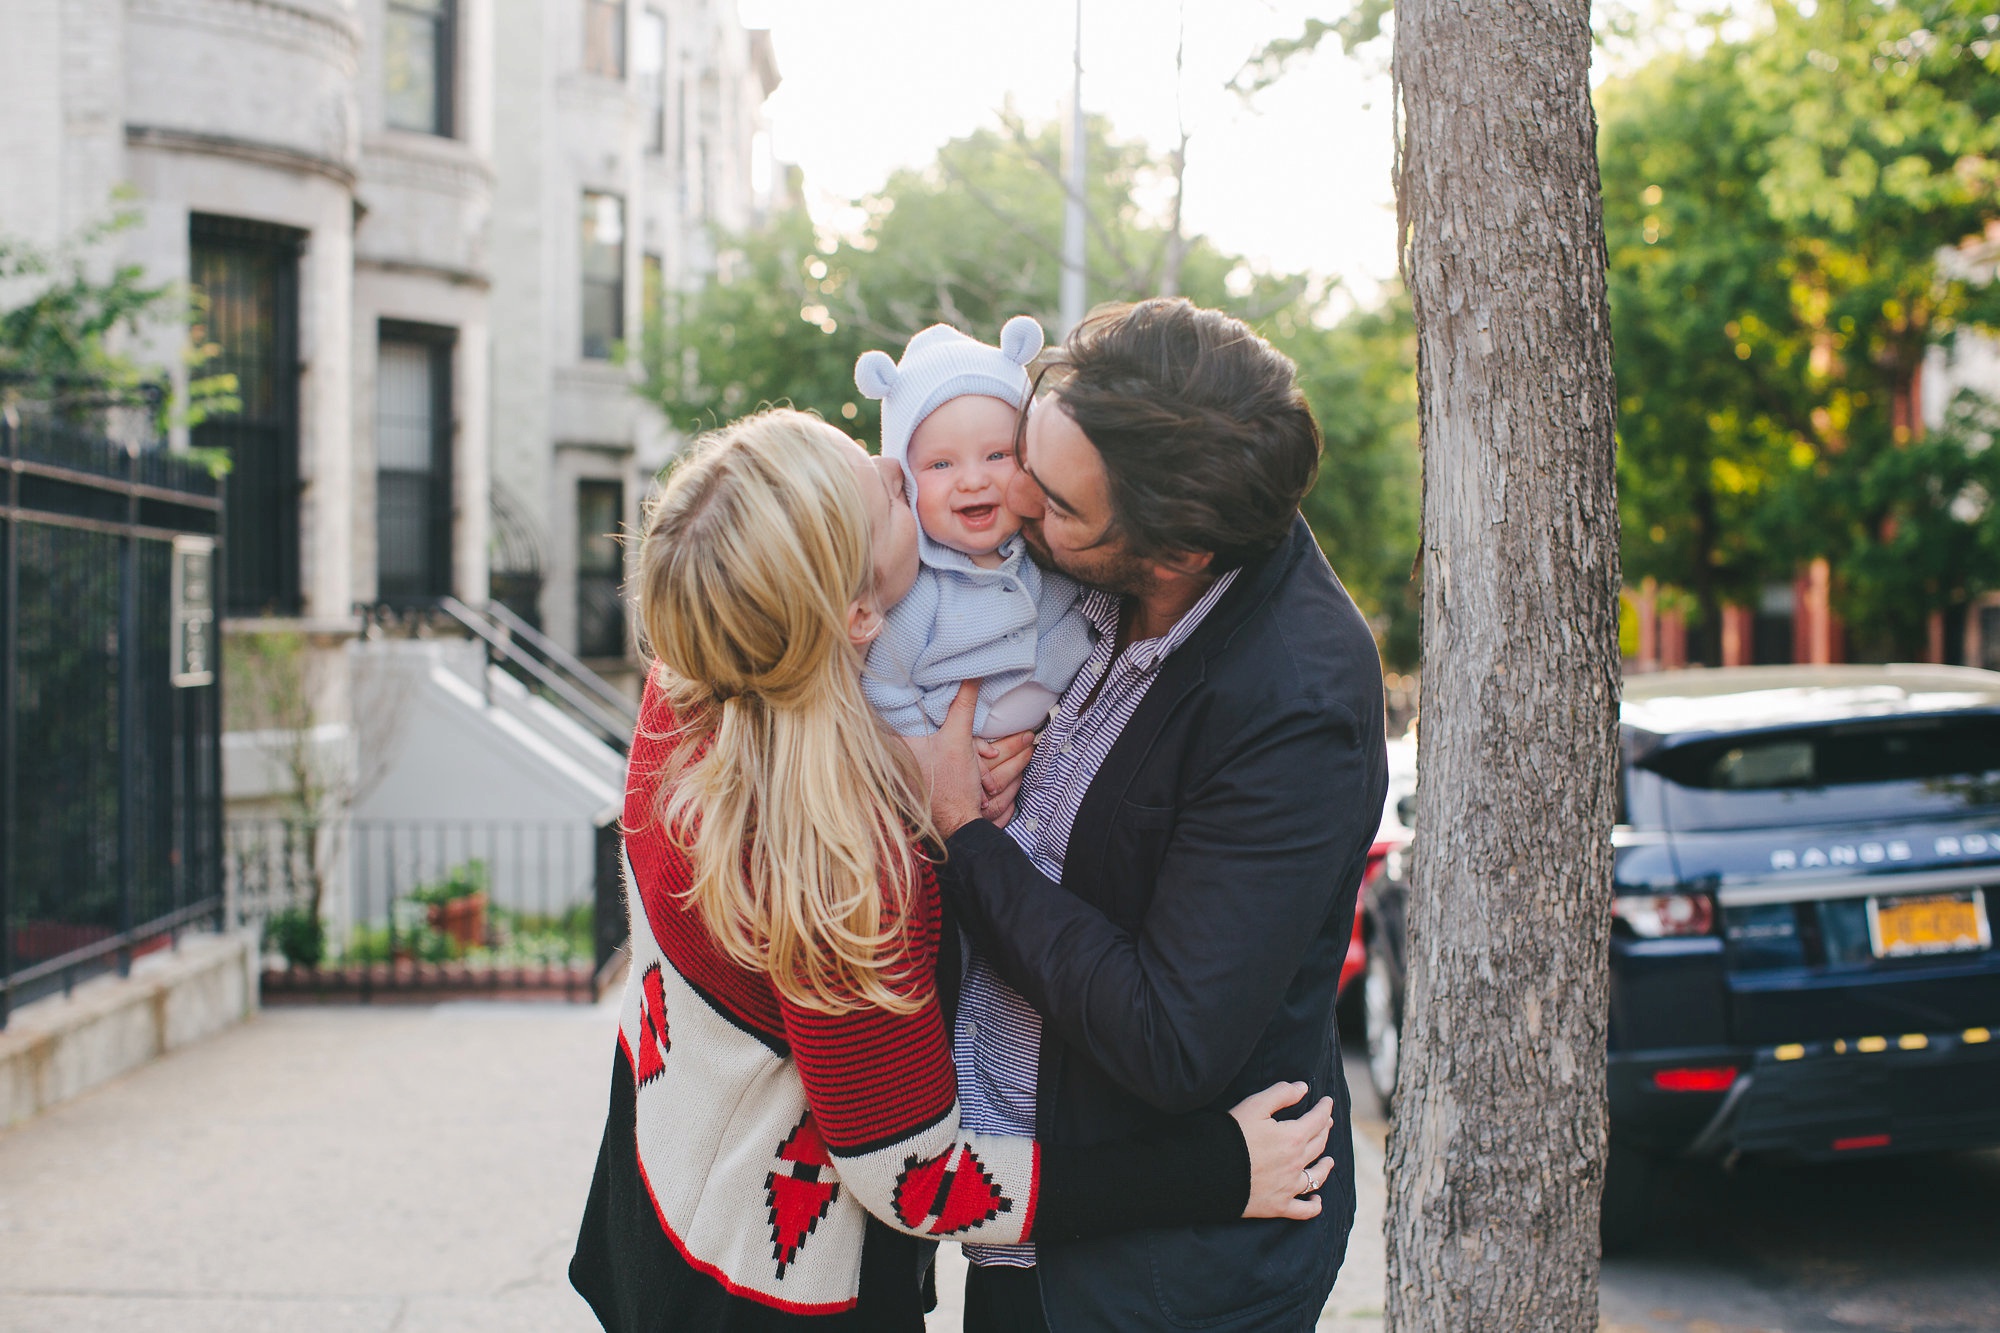 Urban New York Family Lifestyle Session, lifestyle picture ideas, what to wear for lifestyle pictures